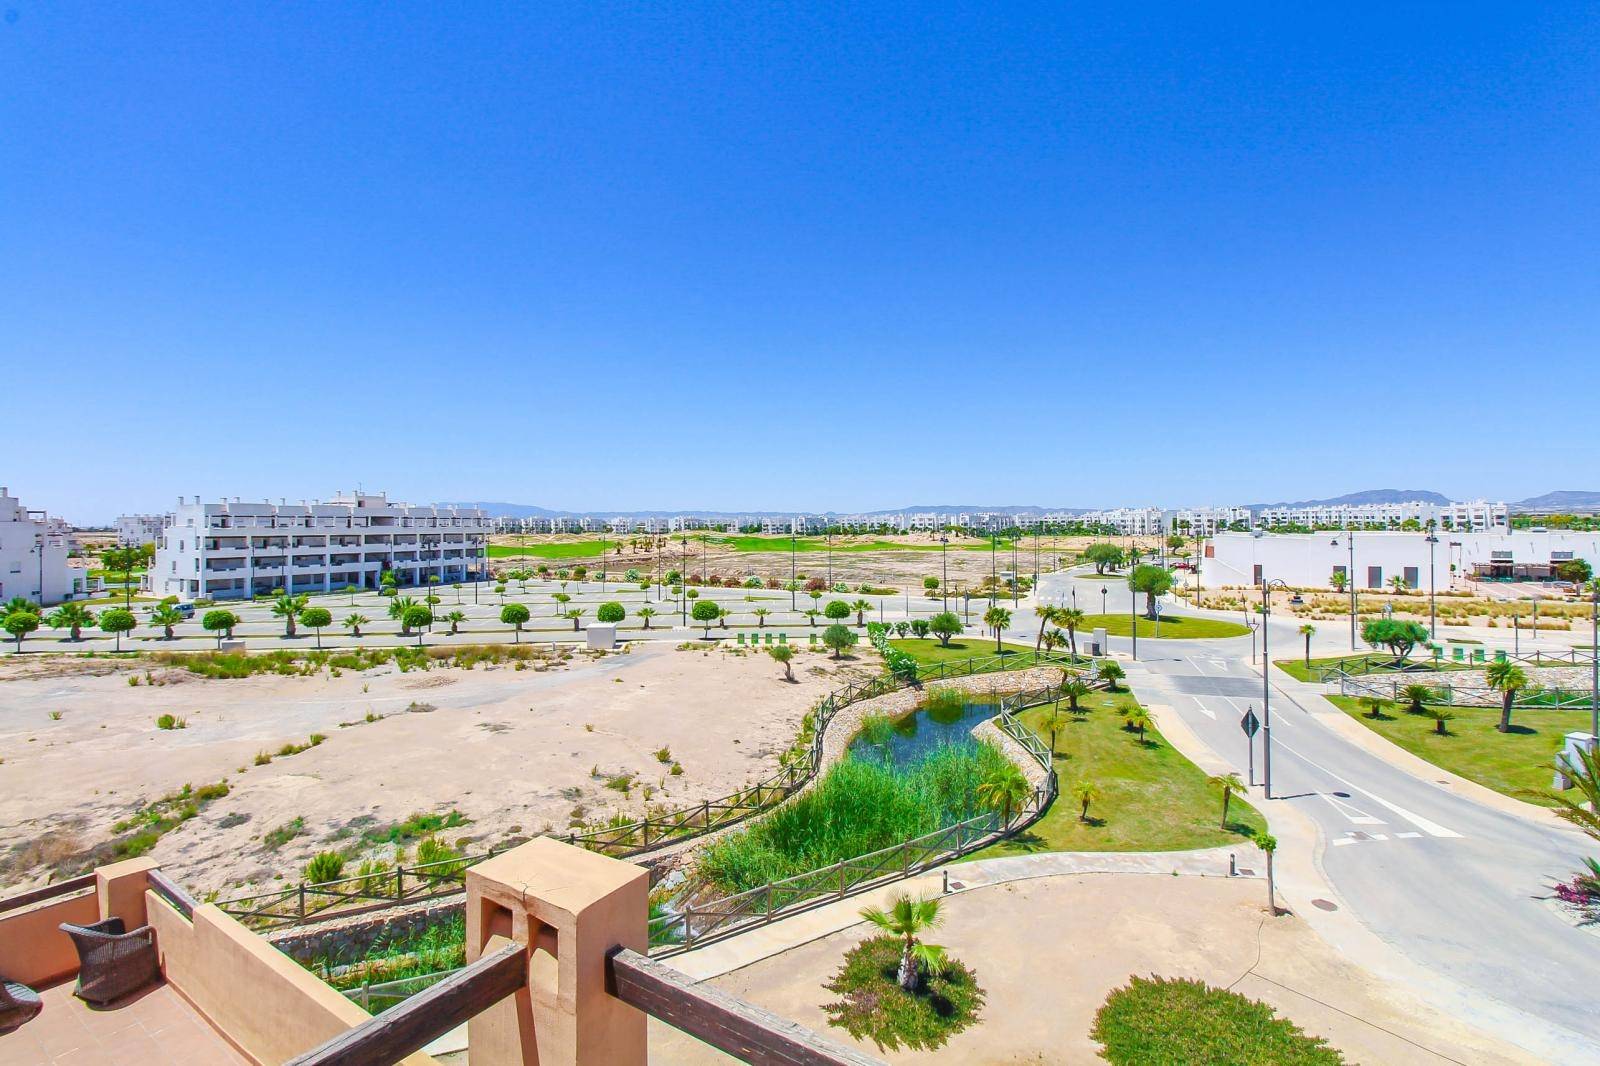 SPECTACULAR PENTHOUSE WITH LARGE TERRACE ON AN EXCLUSIVE GOLF COURSE